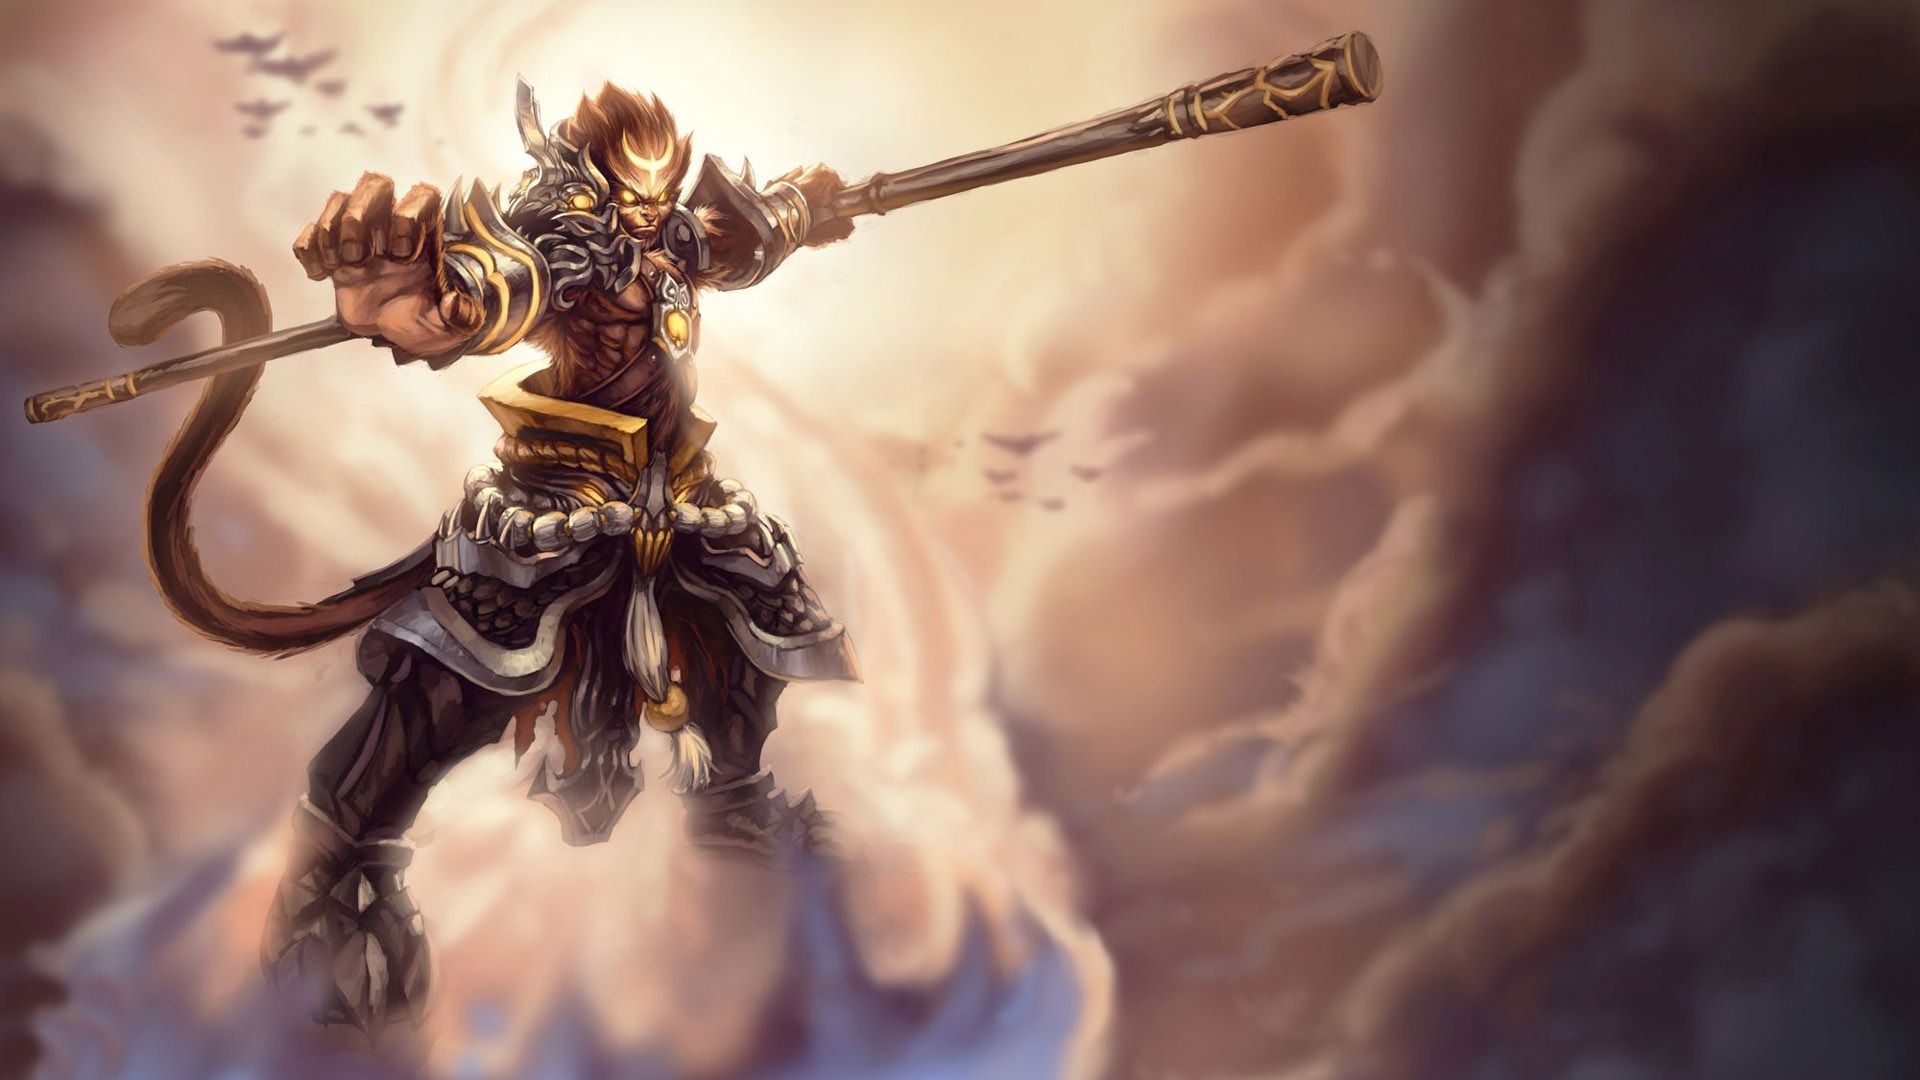 Wukong Wallpapers Wallpaper Cave 8656